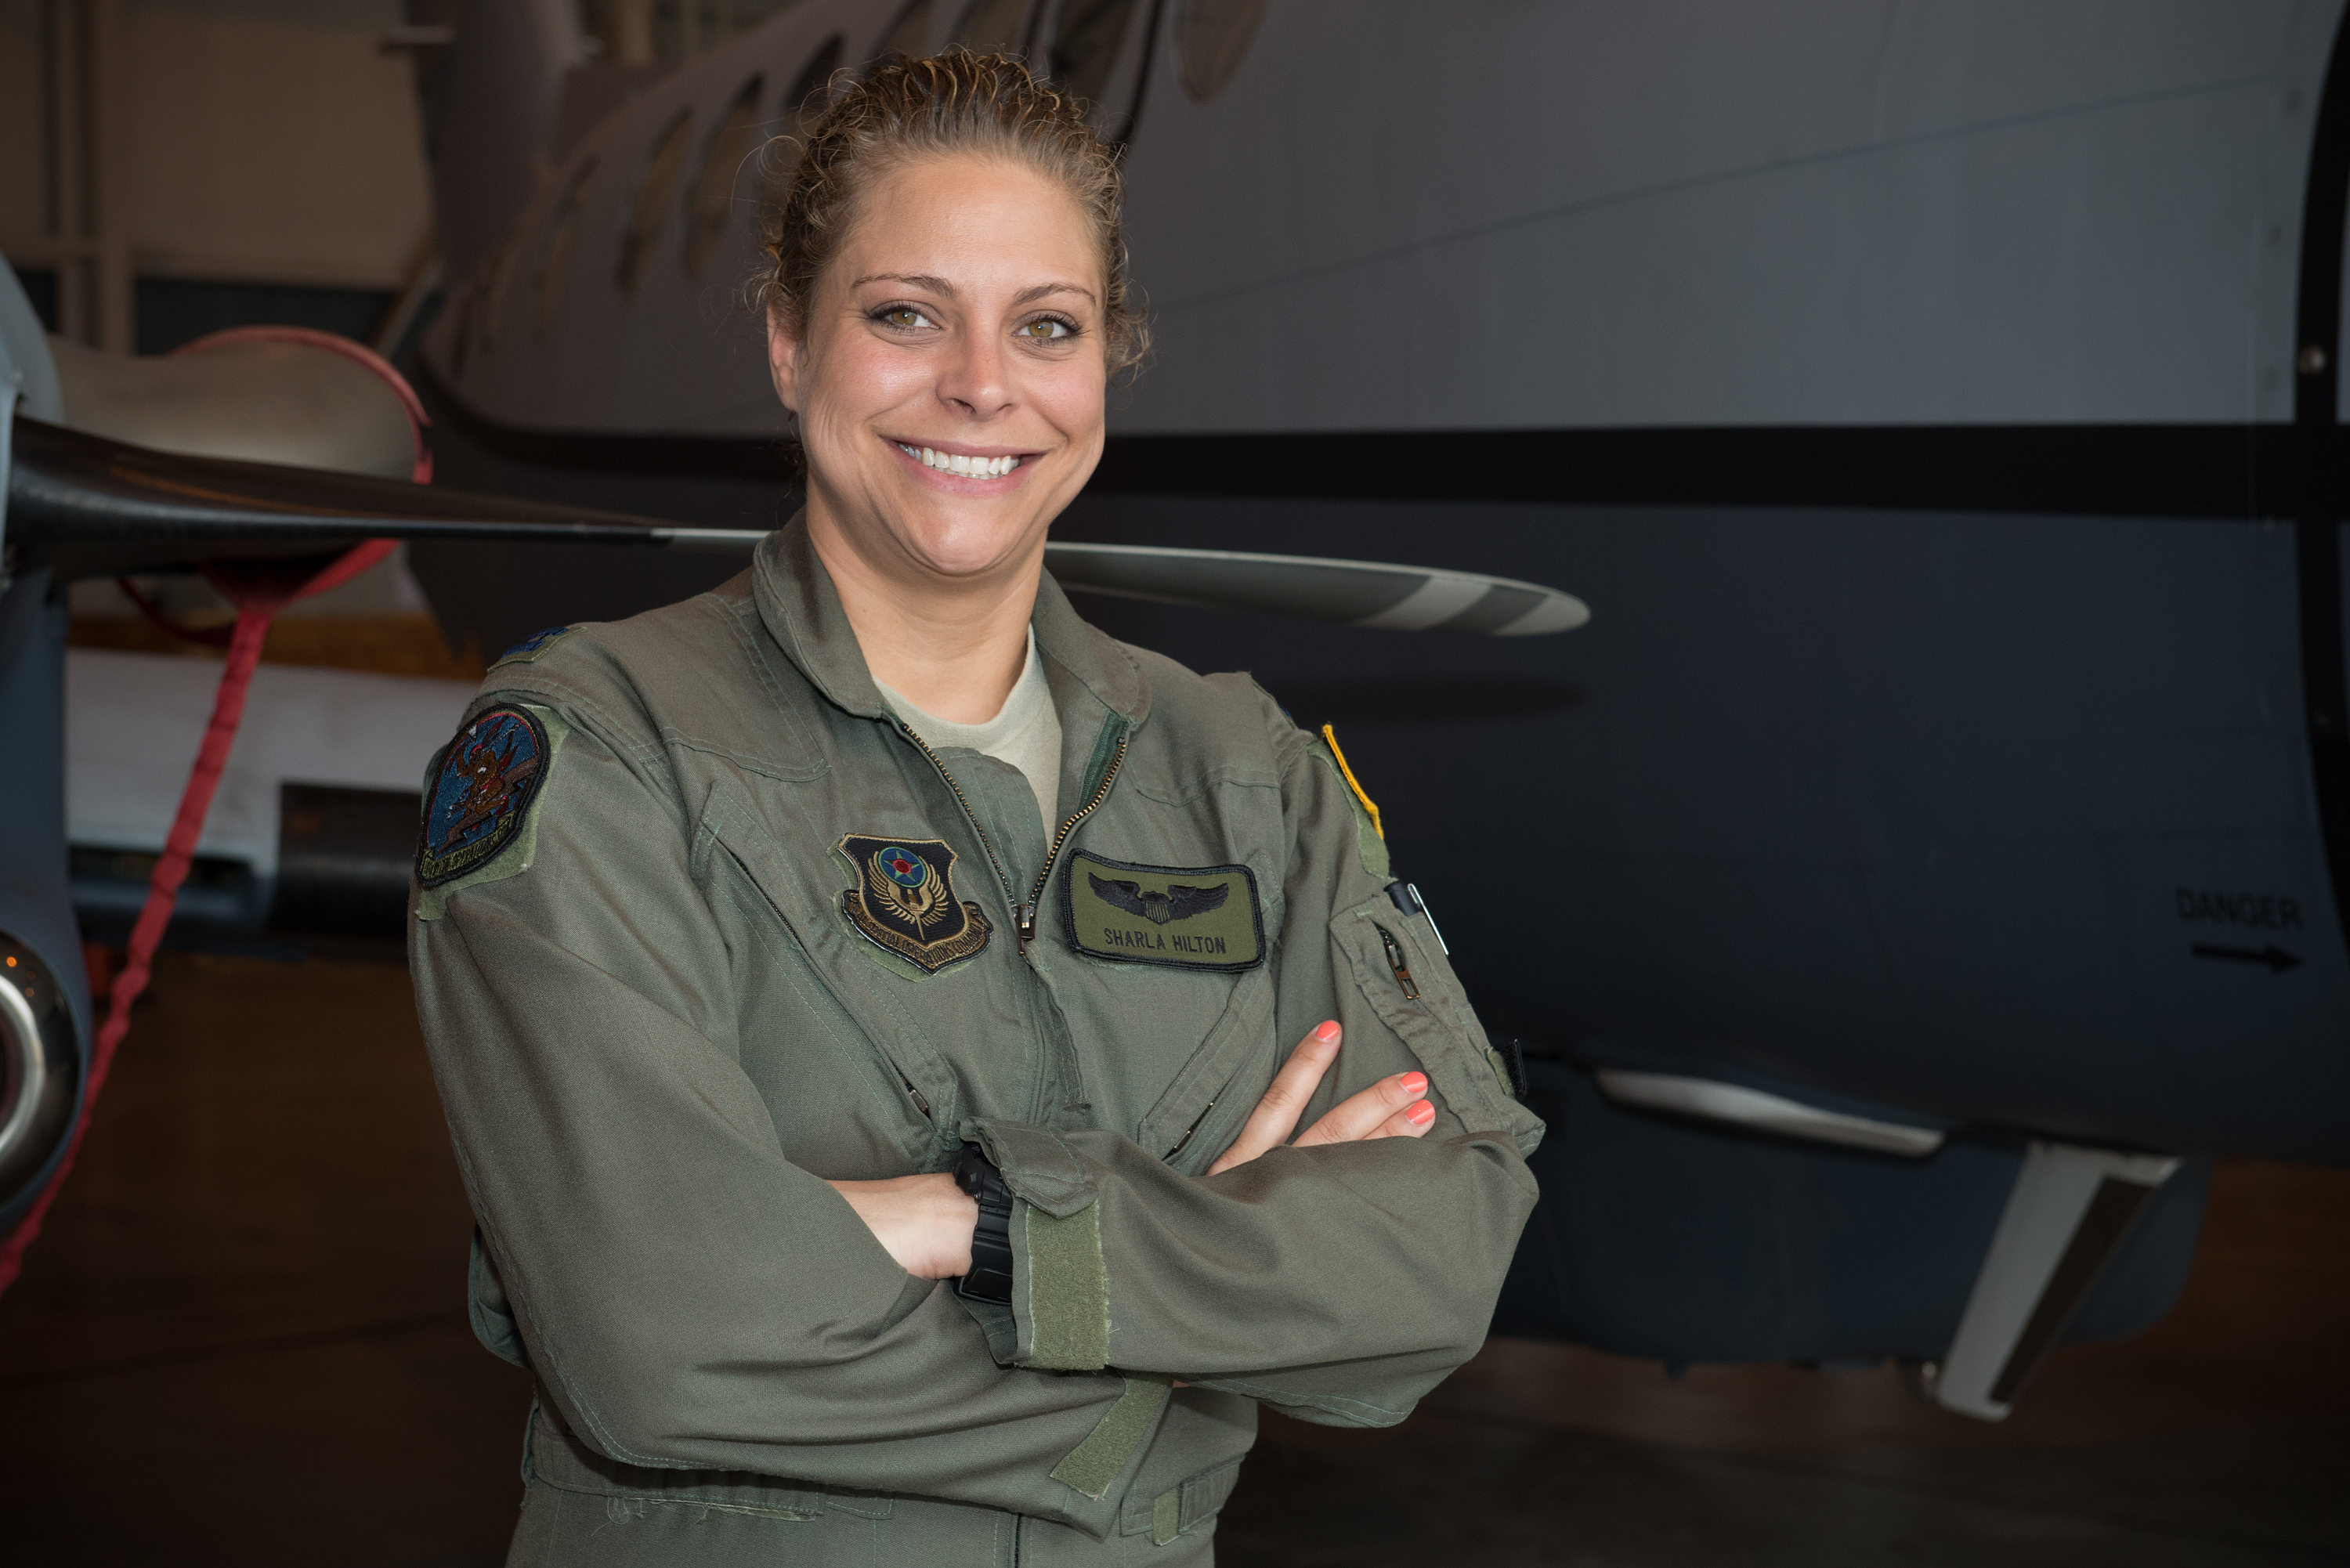 Air Force Capt. Sharla Hilton continues the tradition of women aviators ...